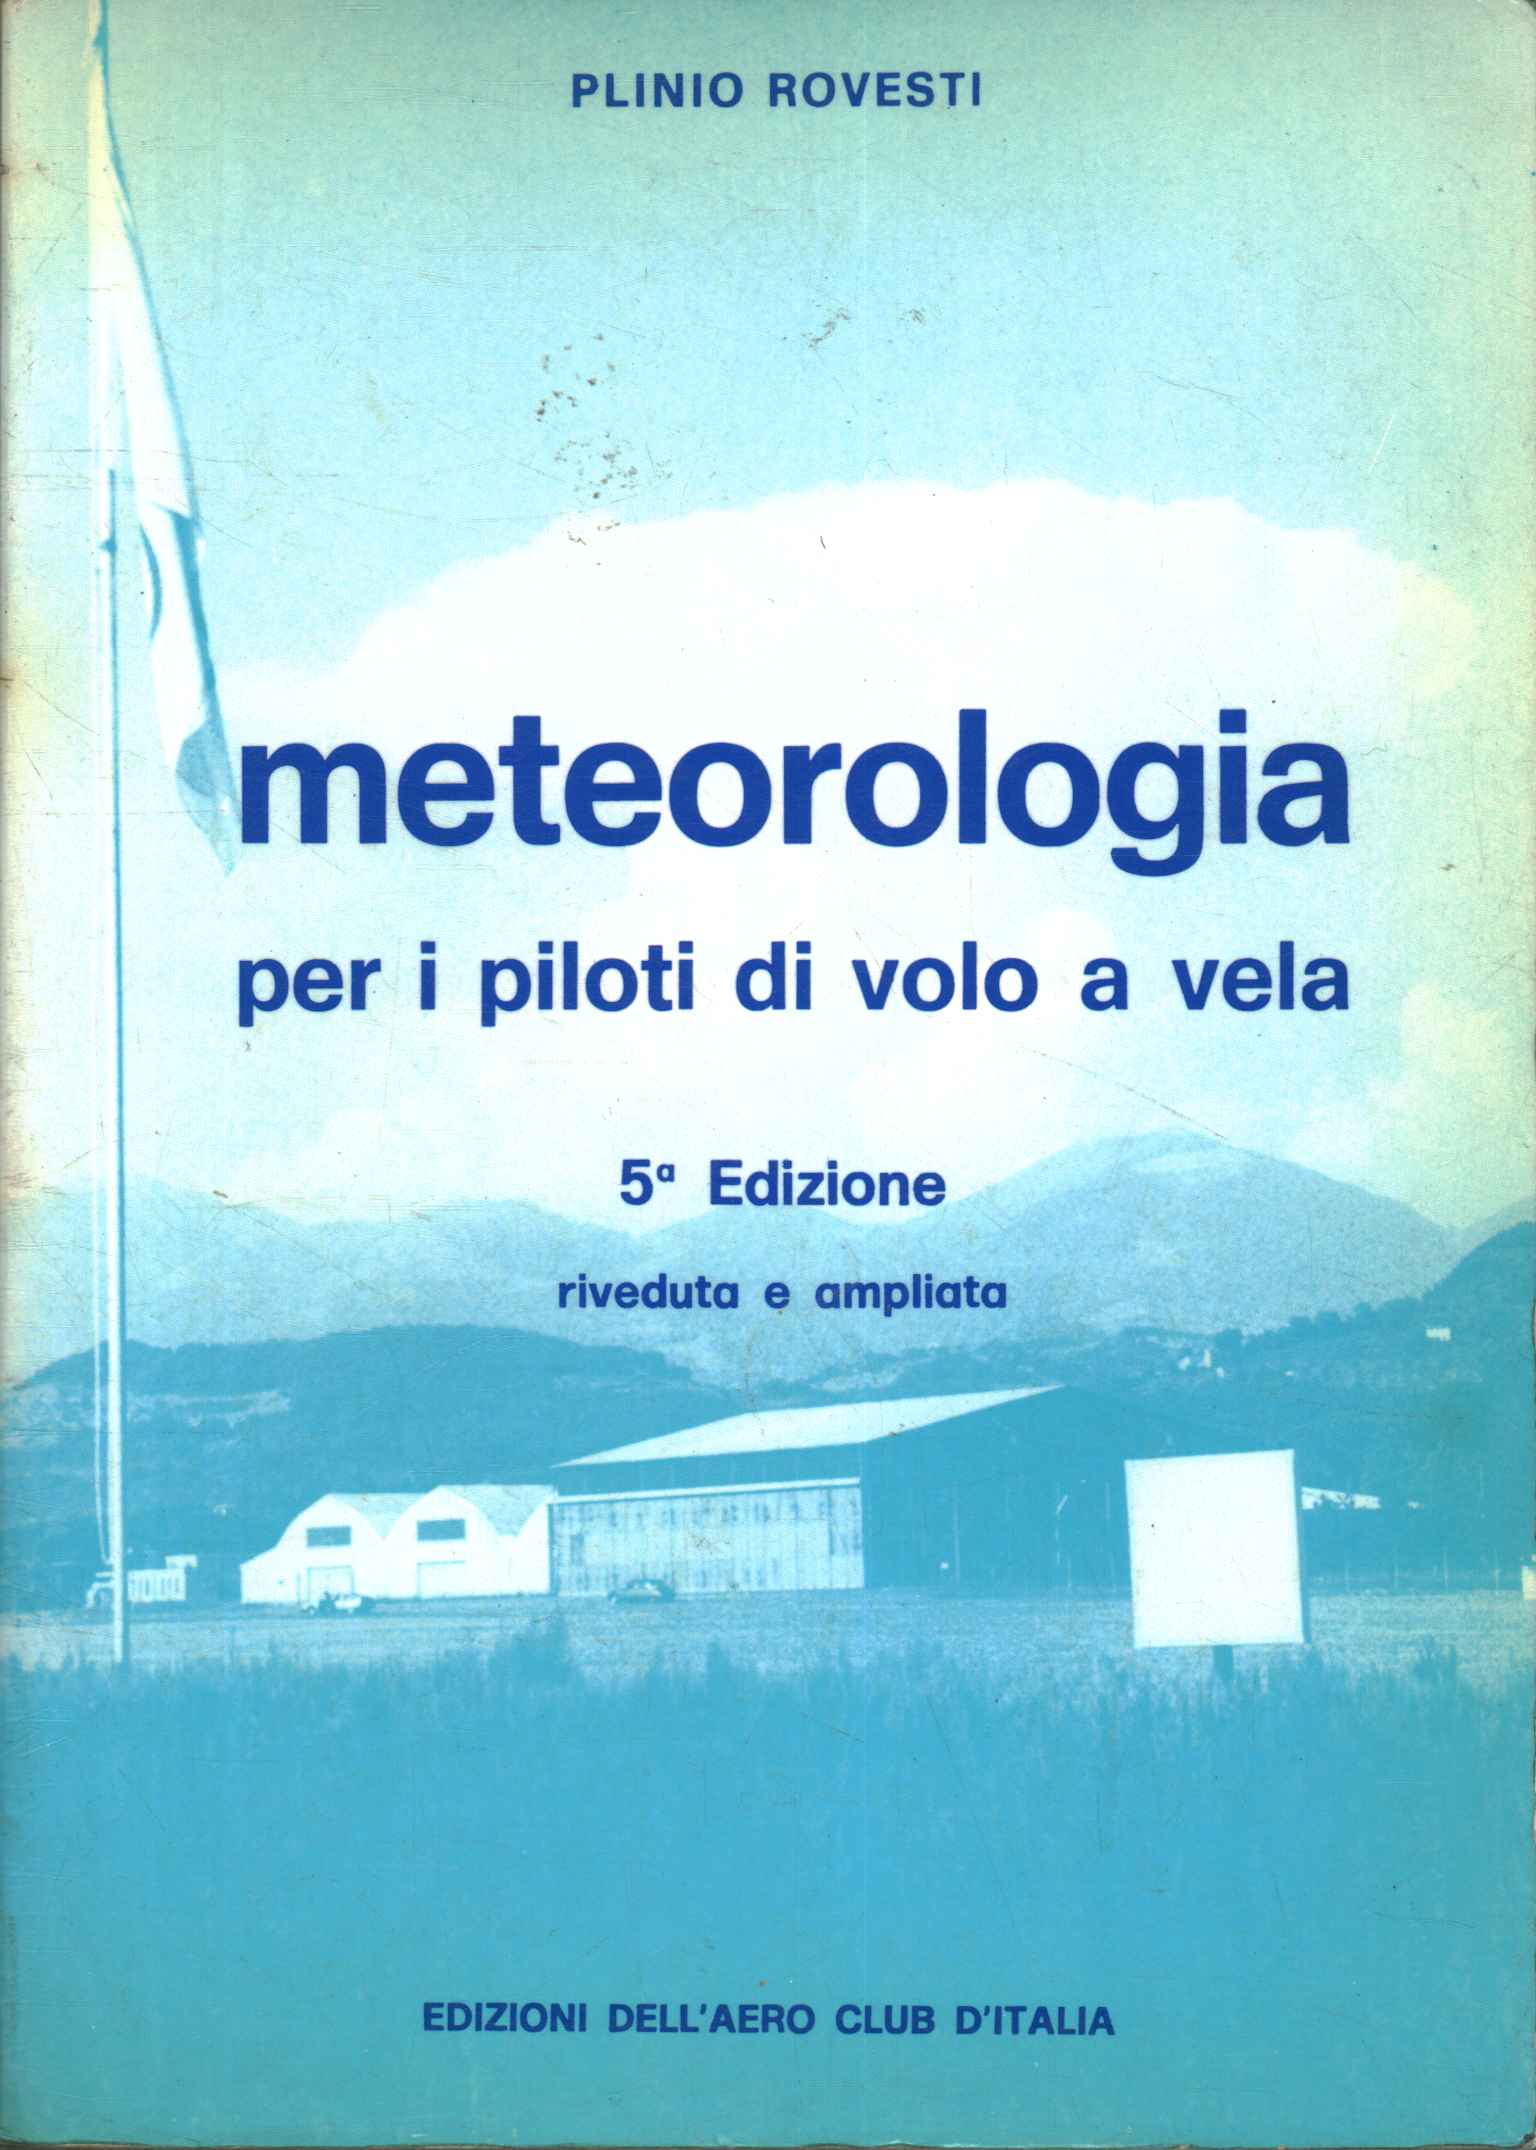 Meteorology for gliding pilots